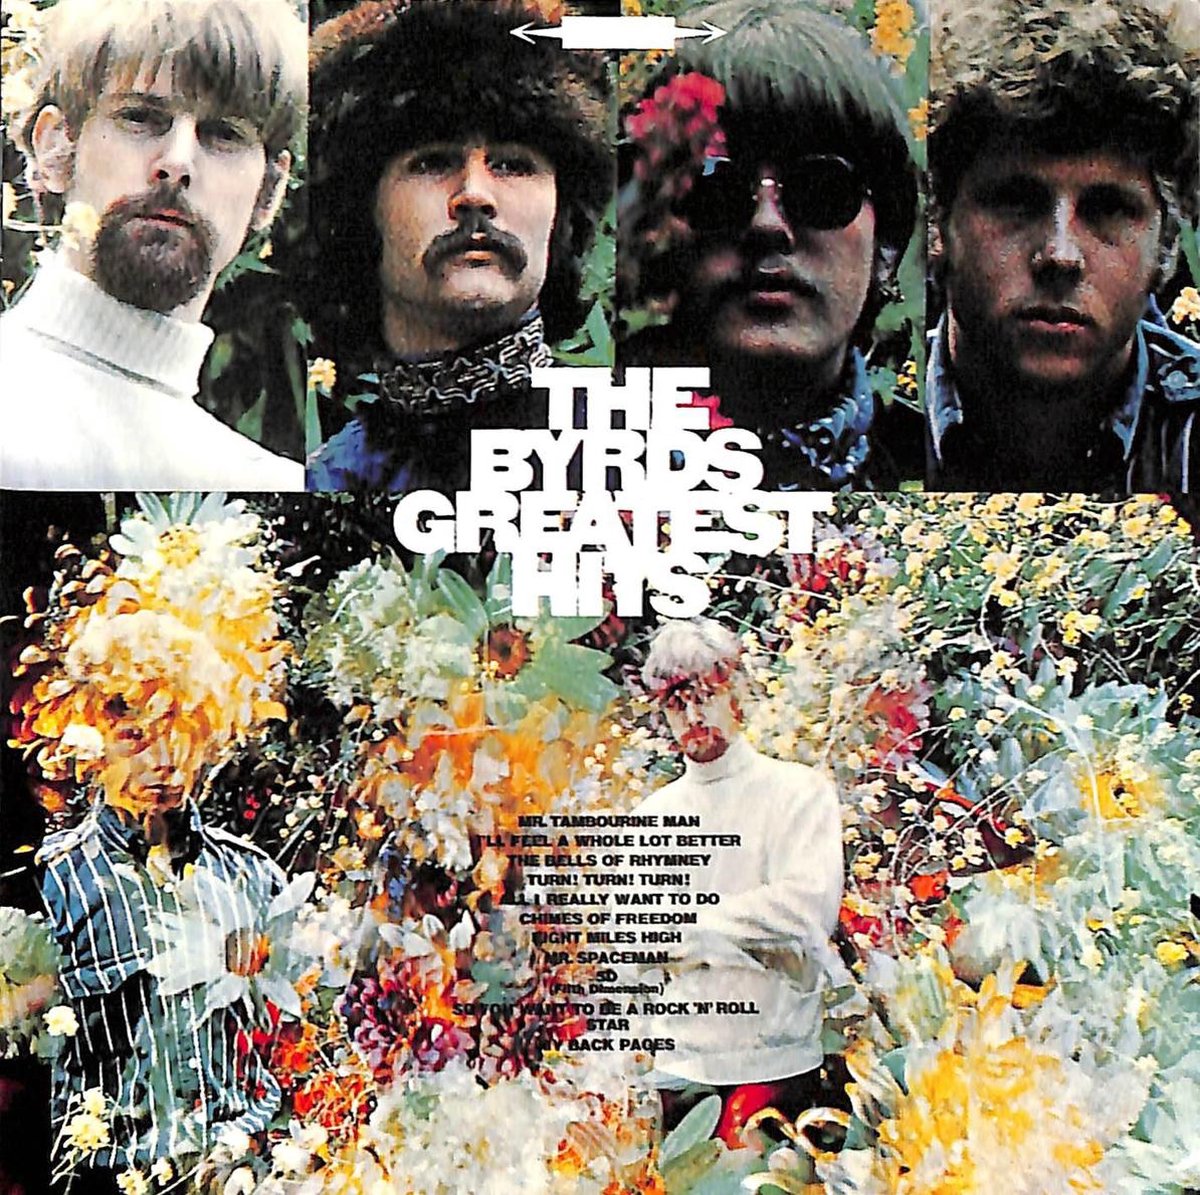 Greatest hits - The Byrds